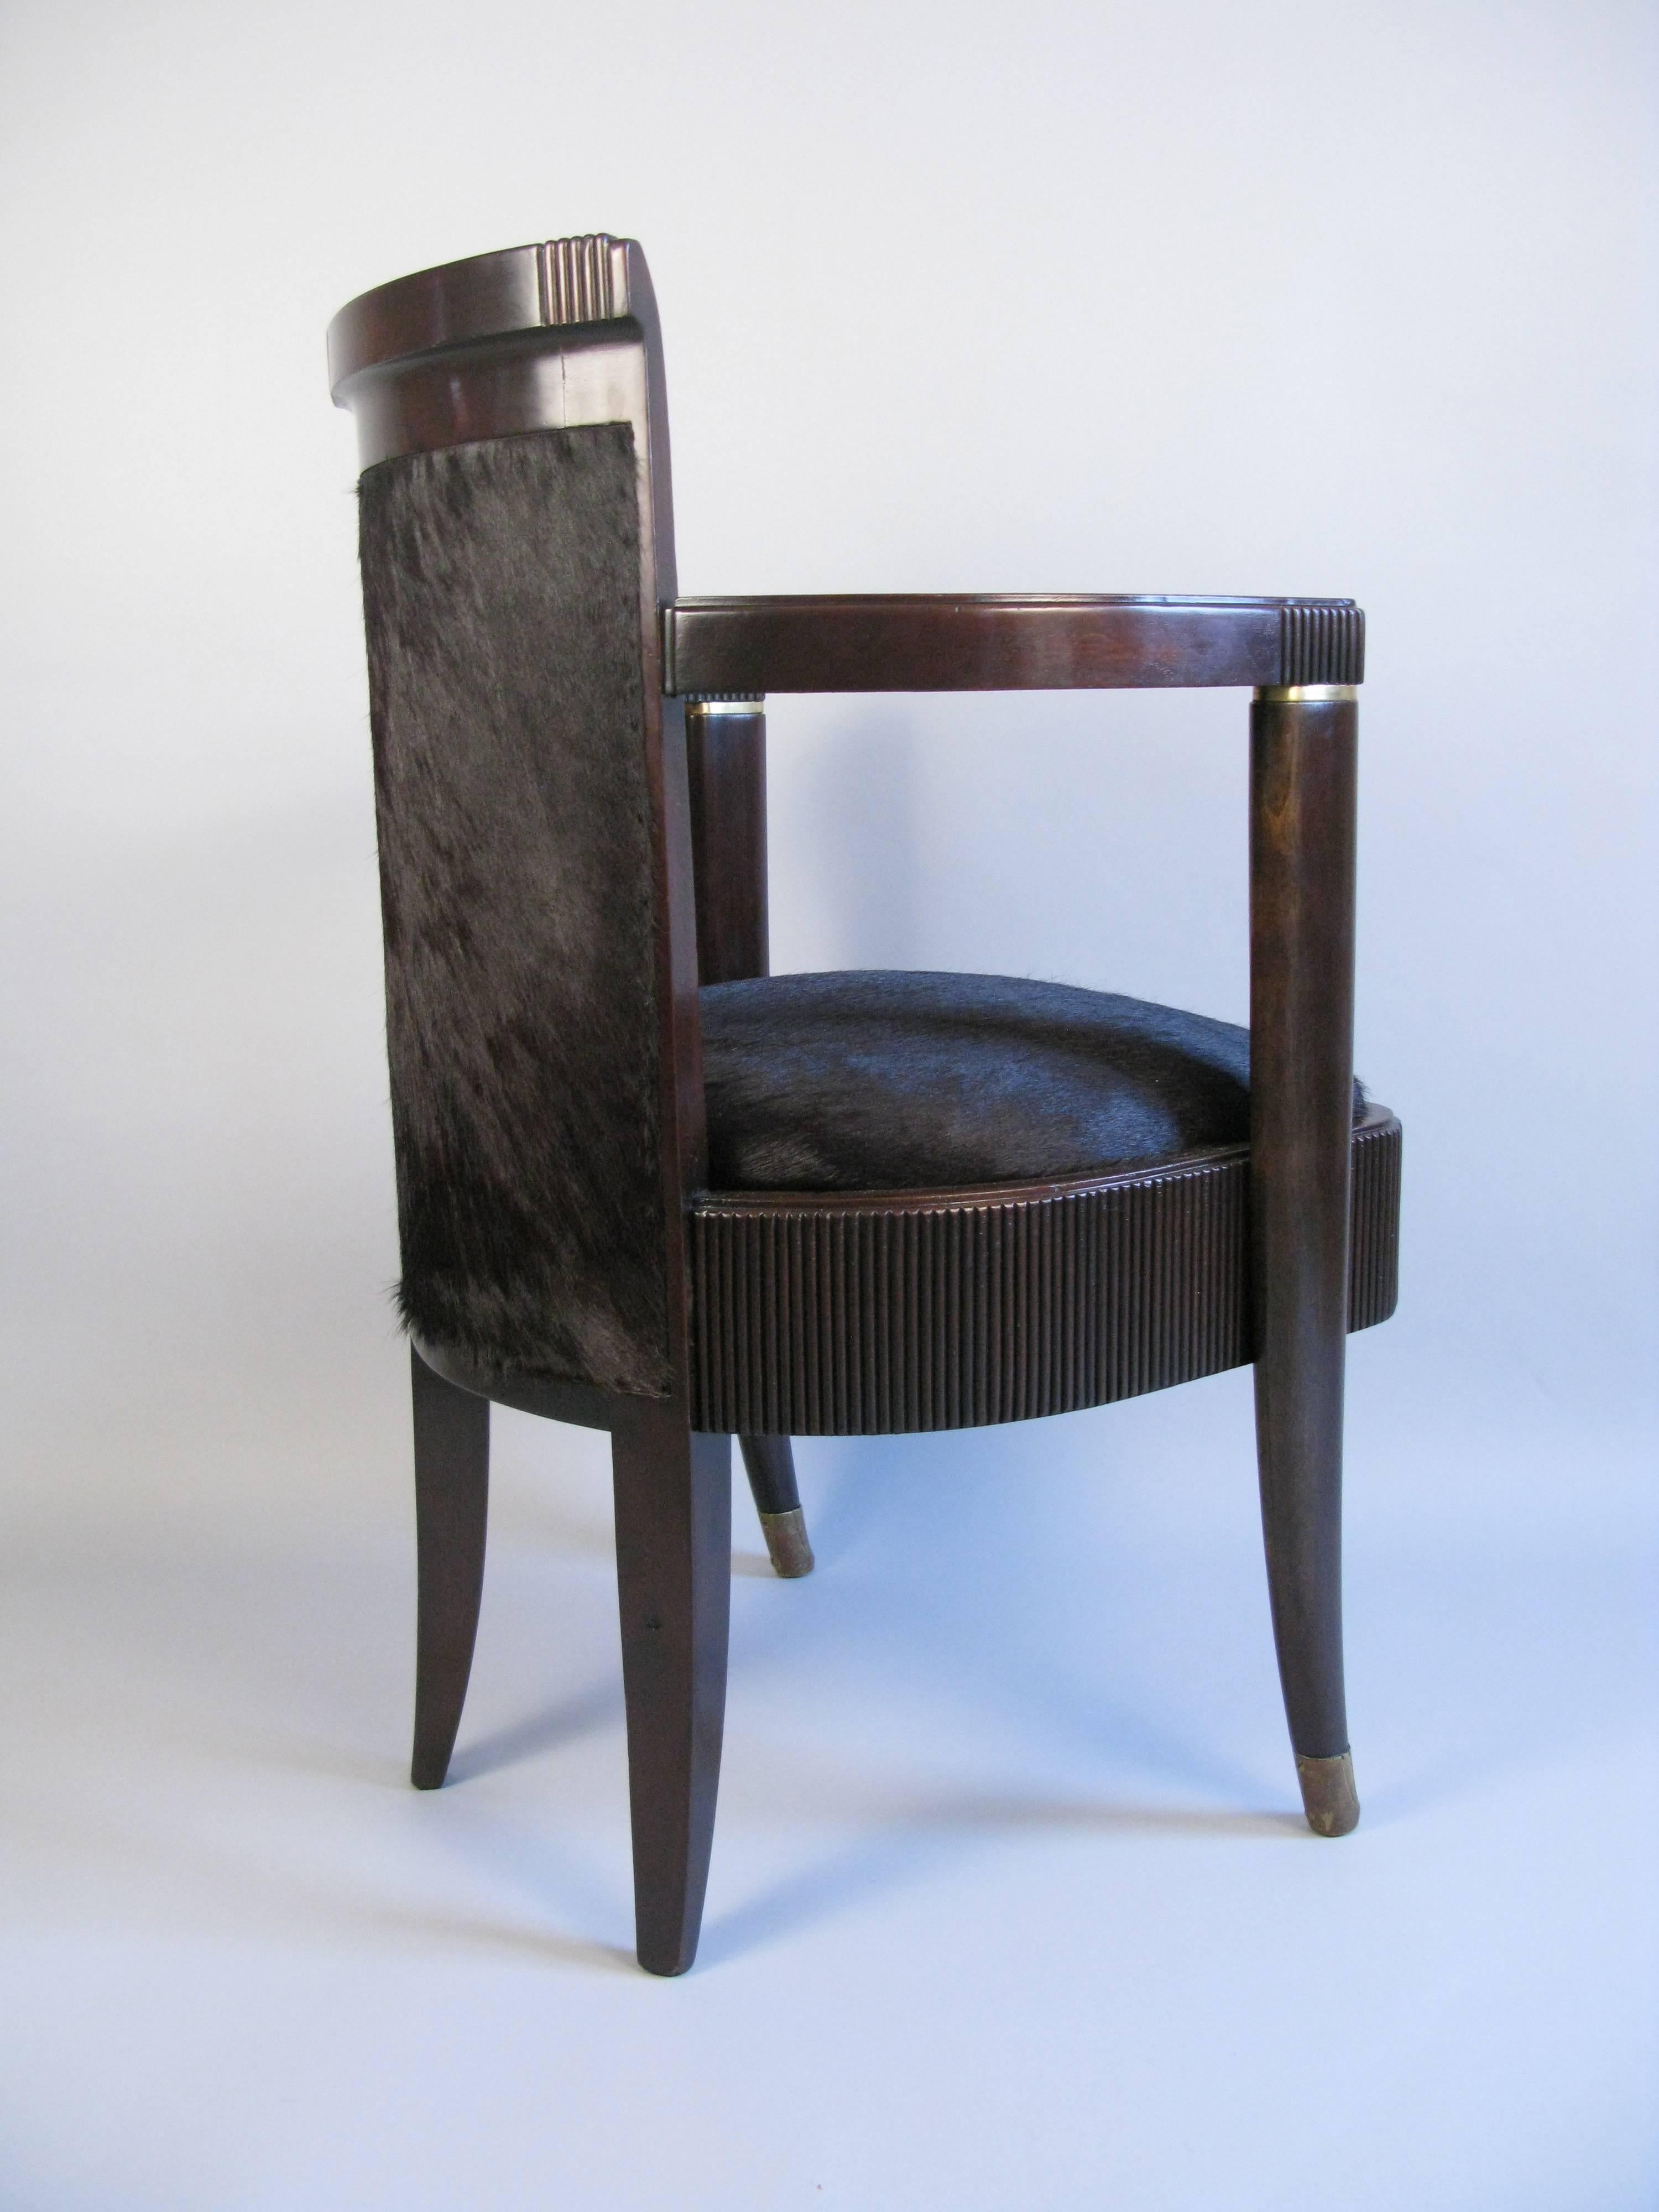 Mid-20th Century Pair of Dining chairs from the French Luxury Liner S.S. Normandie 1935-1942